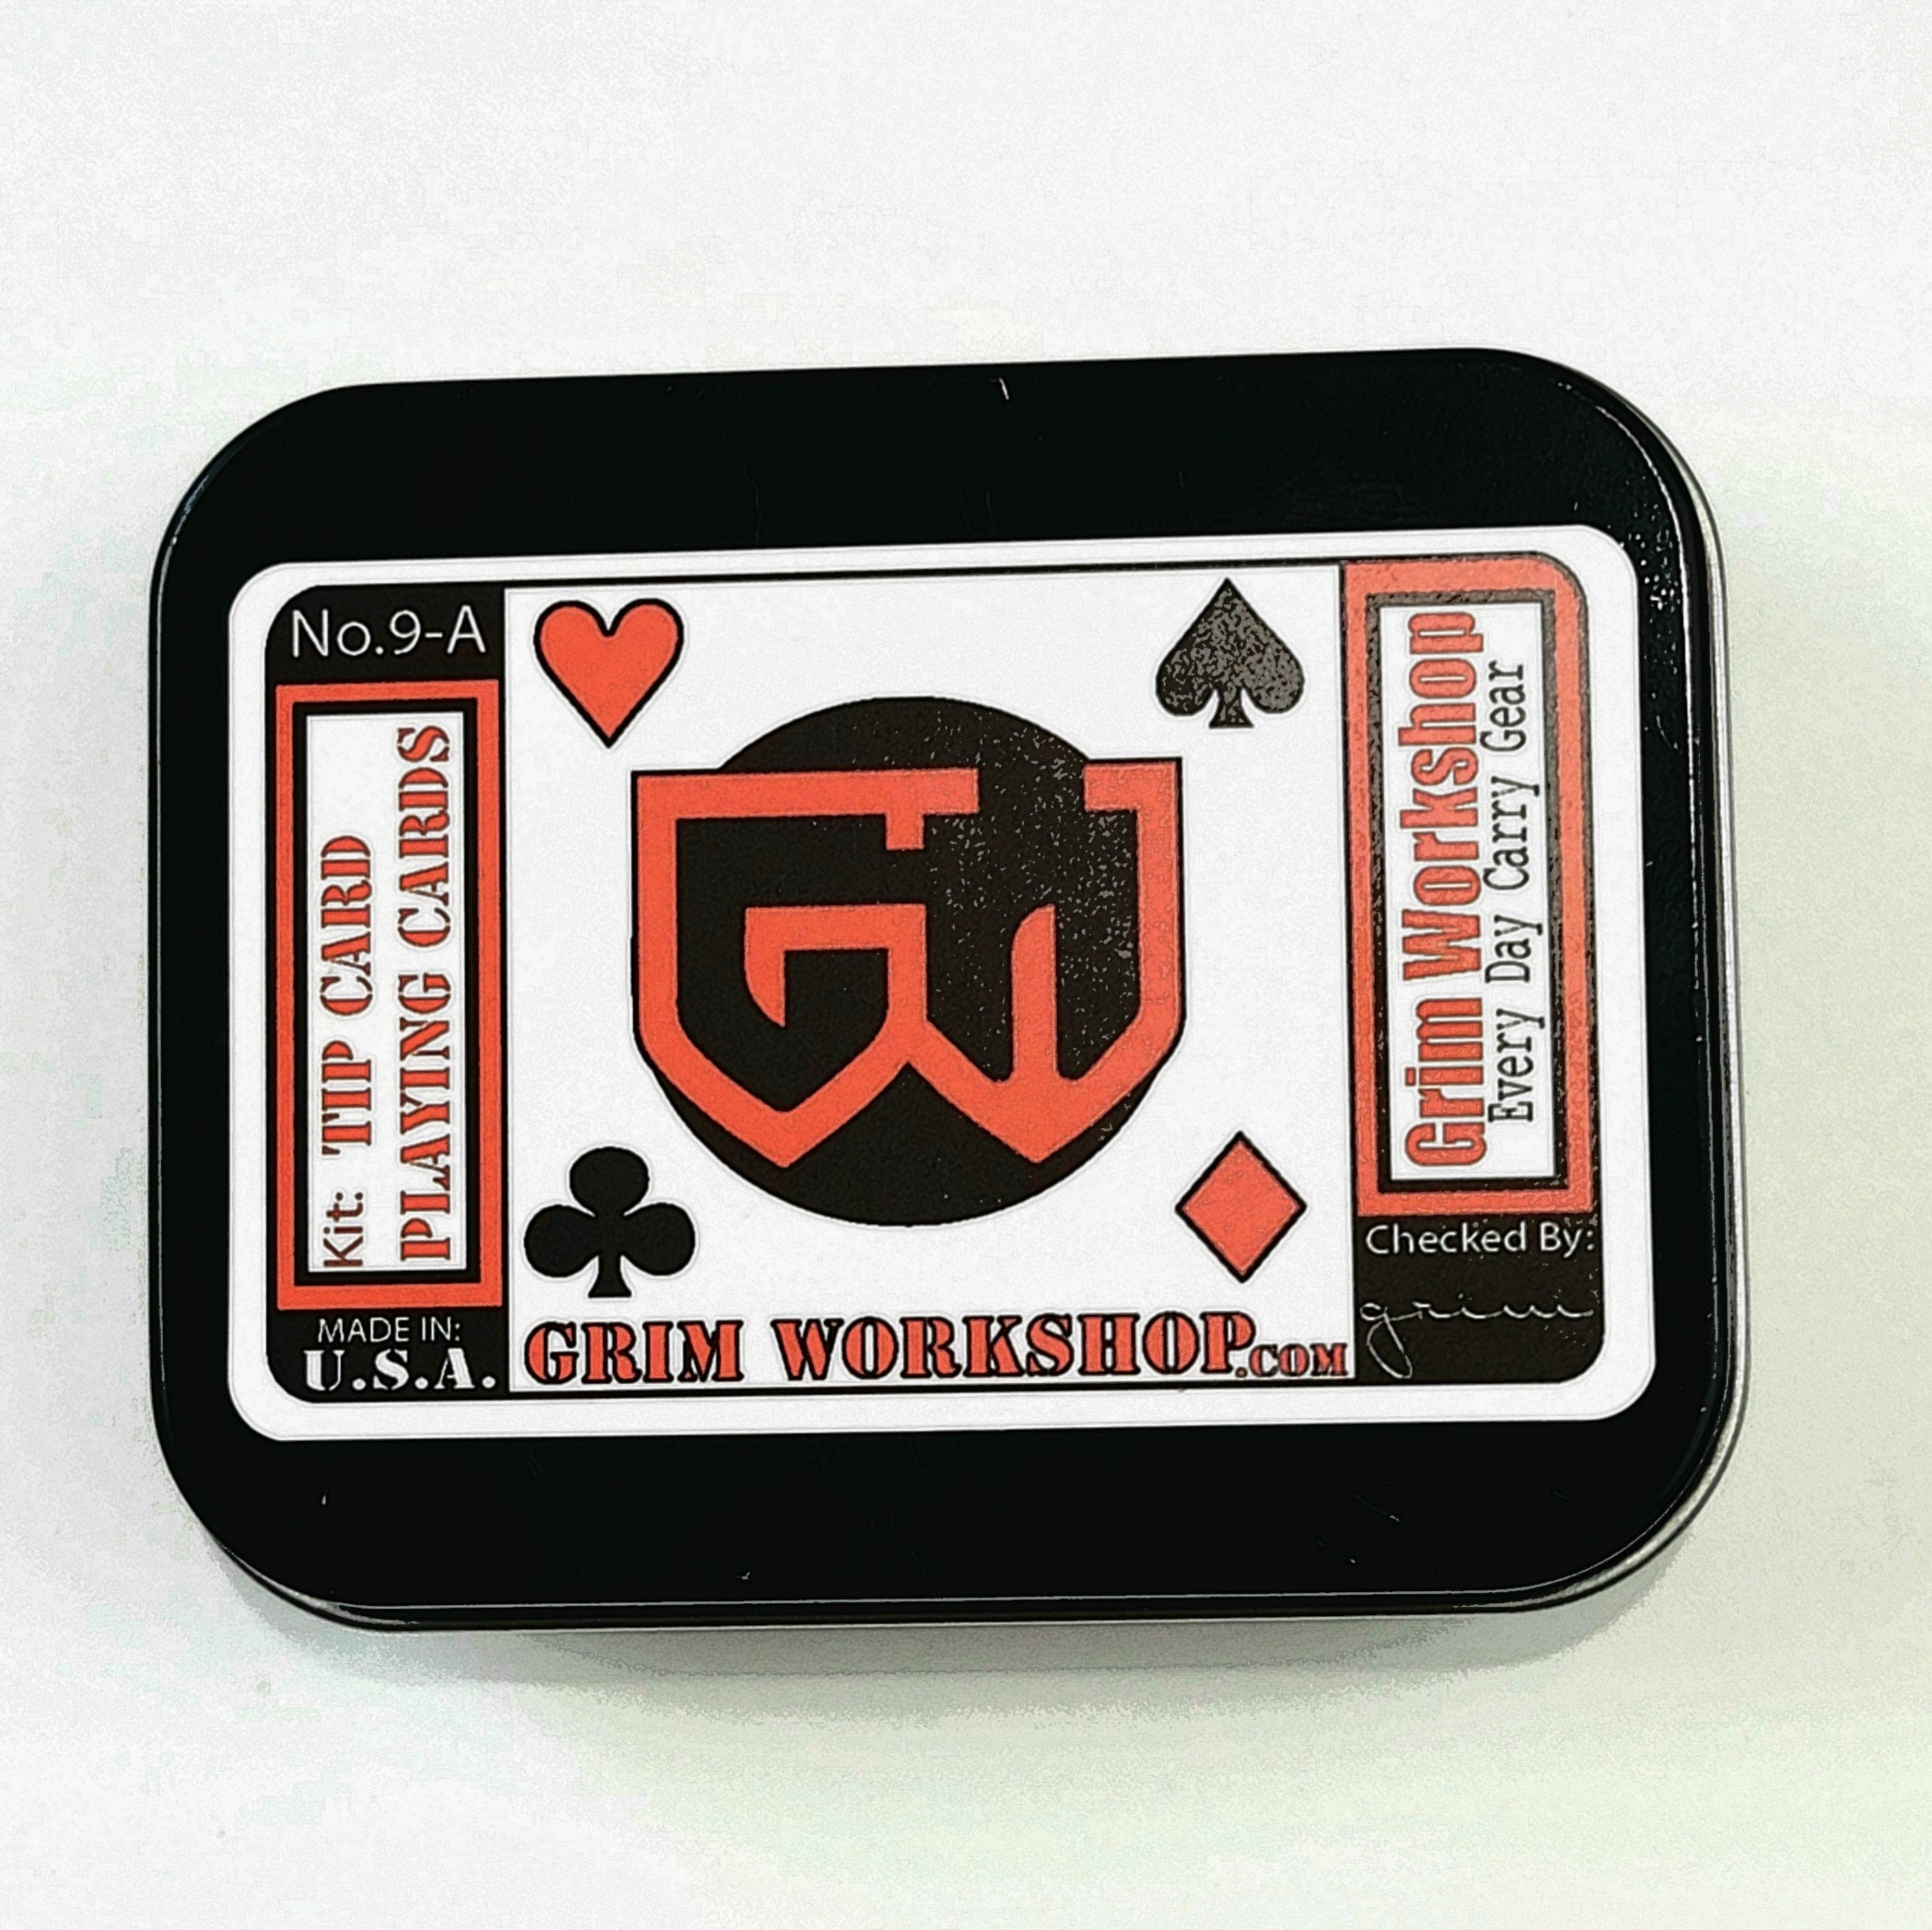 deck of waterproof playing cards and survival playing cards with critical information